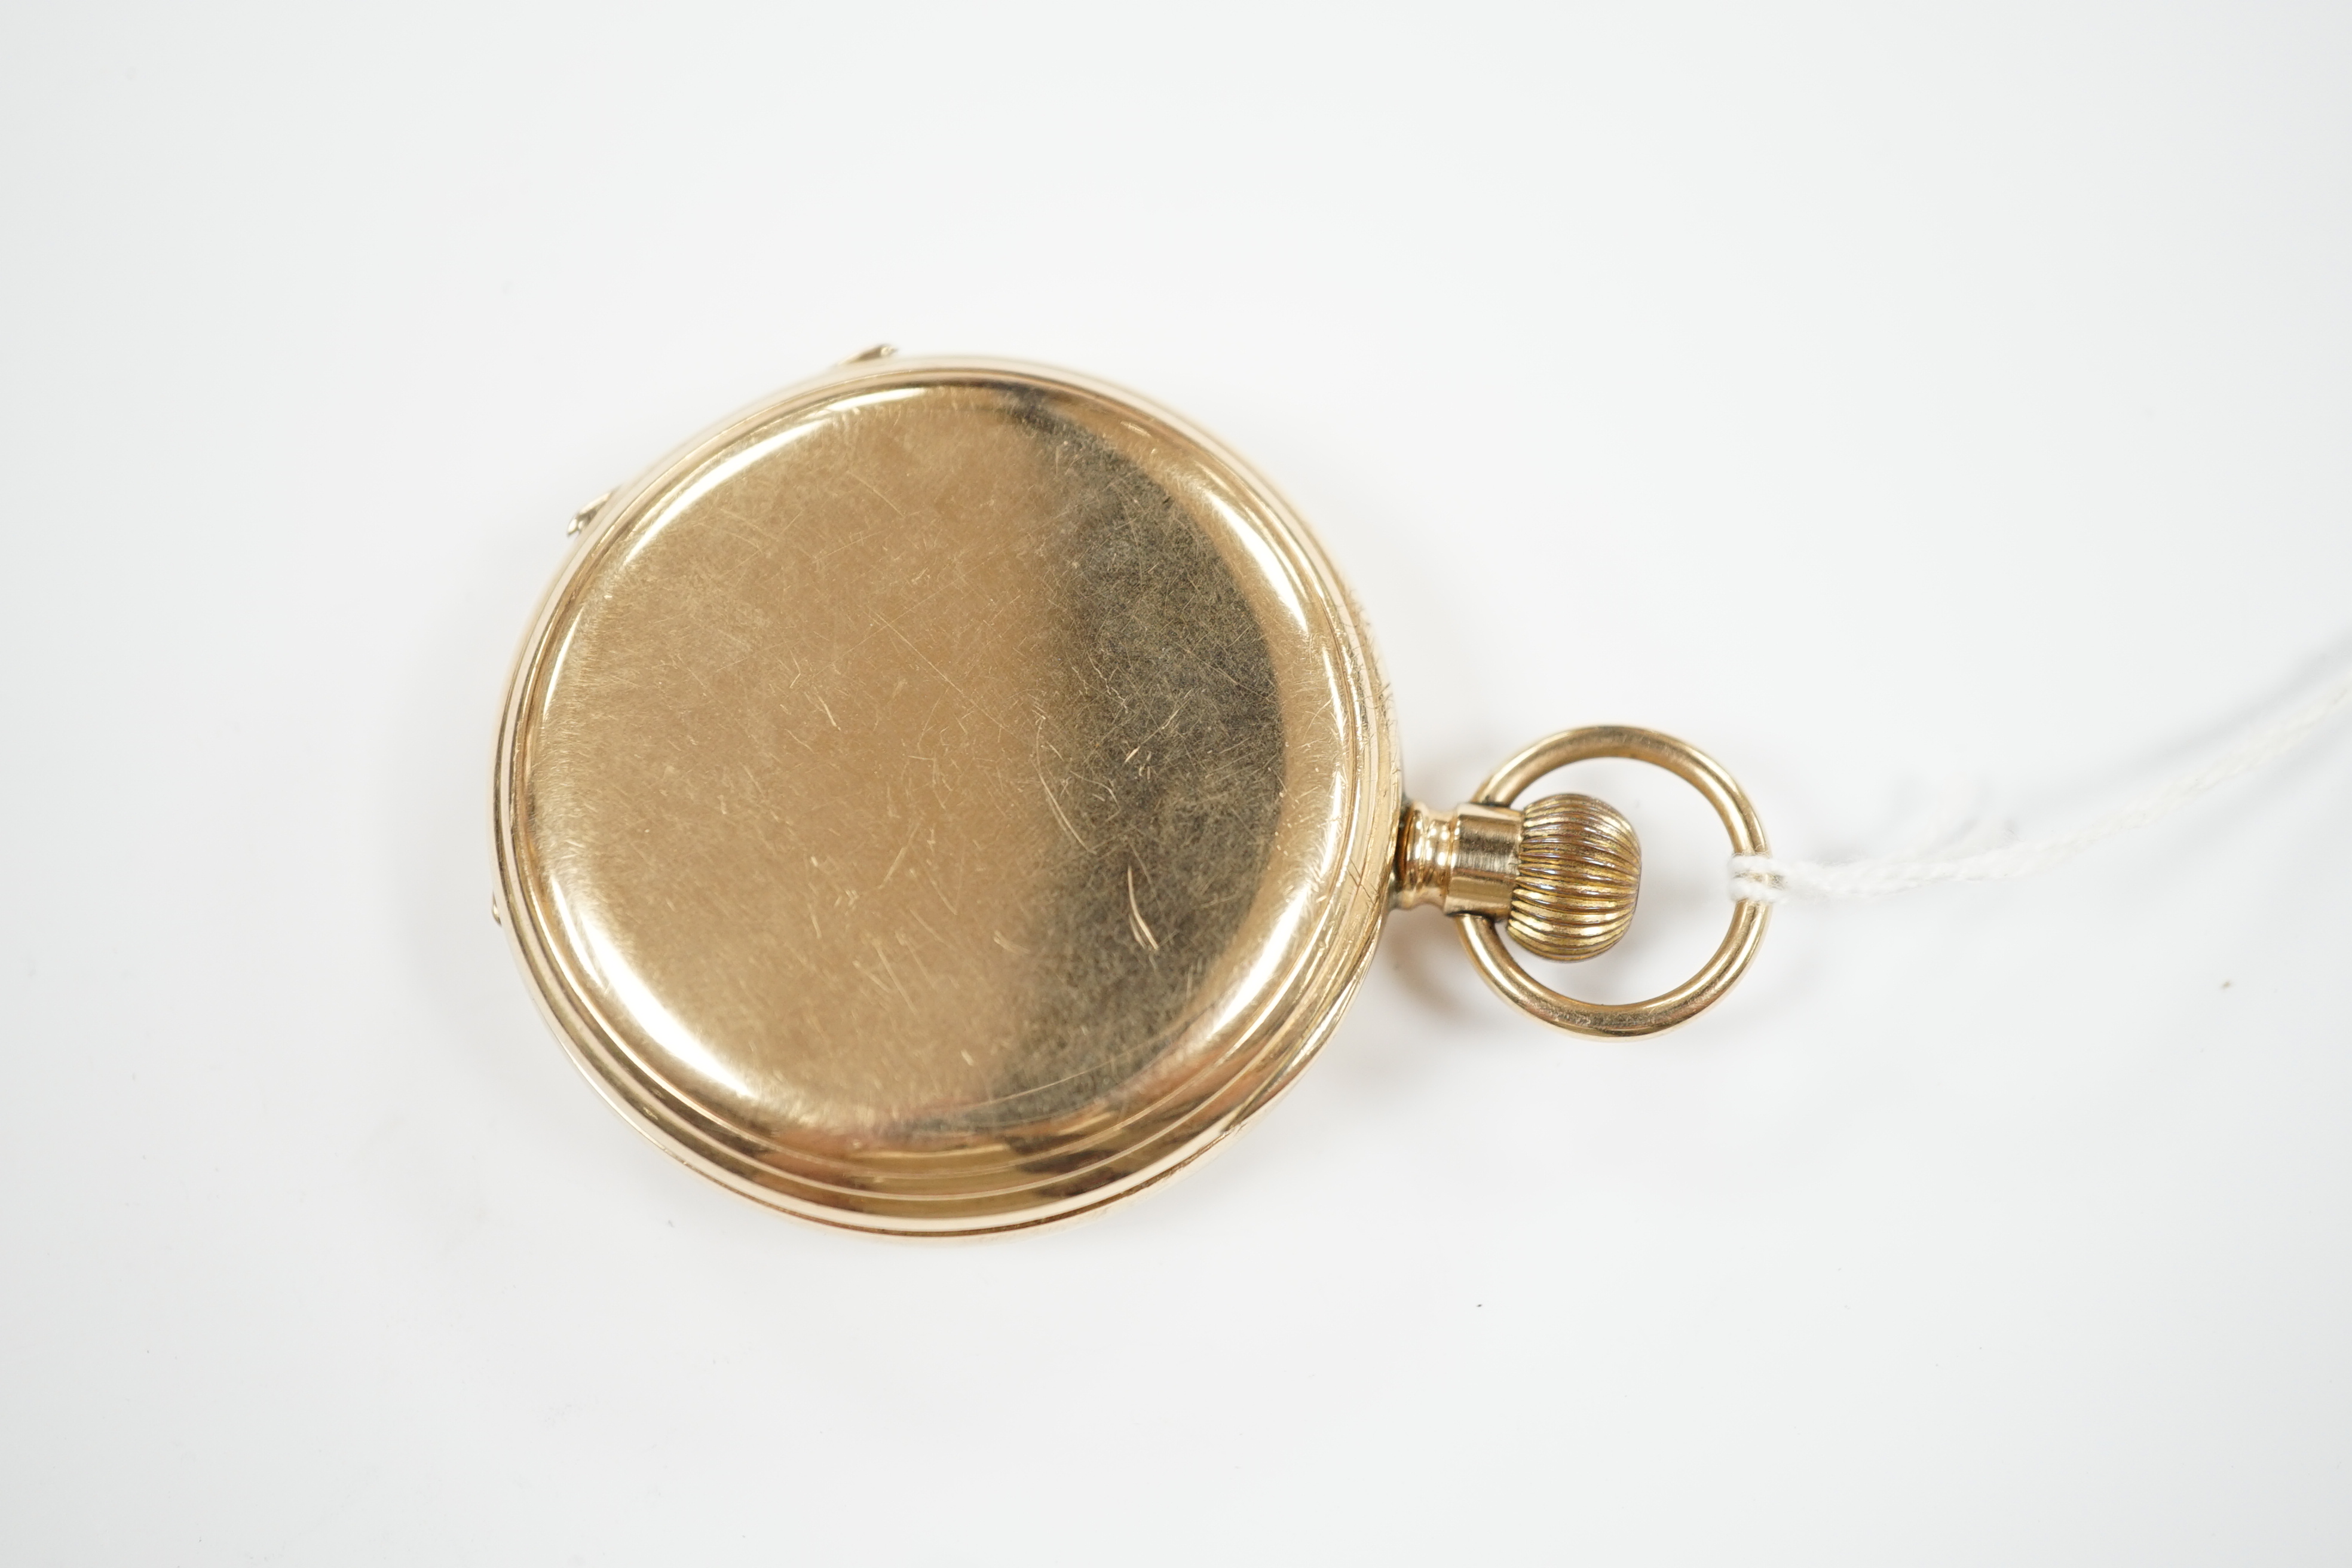 A George V 9ct gold keyless hunter pocket watch, by Thomas Russell of Liverpool, with Roman dial and subsidiary seconds, case diameter 50mm, gross weight 90.4 grams.